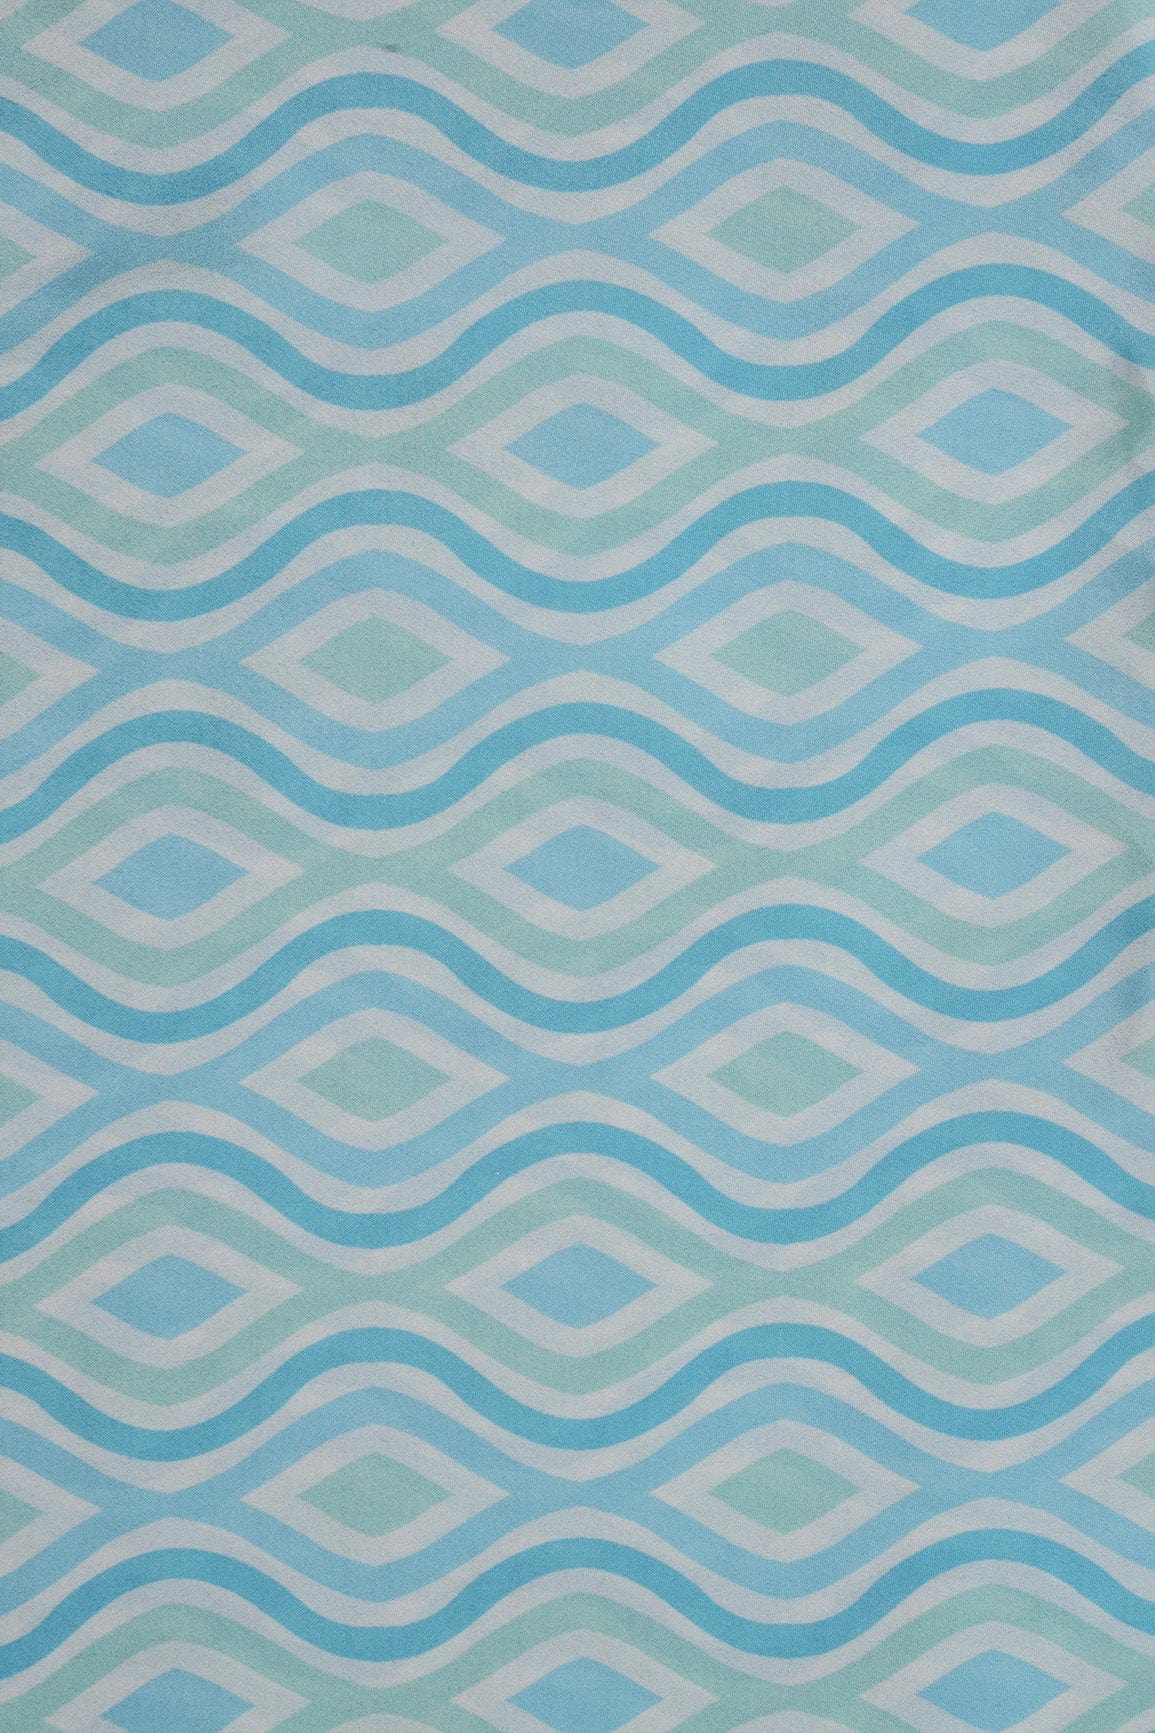 doeraa Prints Blue And Mint Green Ikat Pattern Digital Print On white French Crepe Fabric